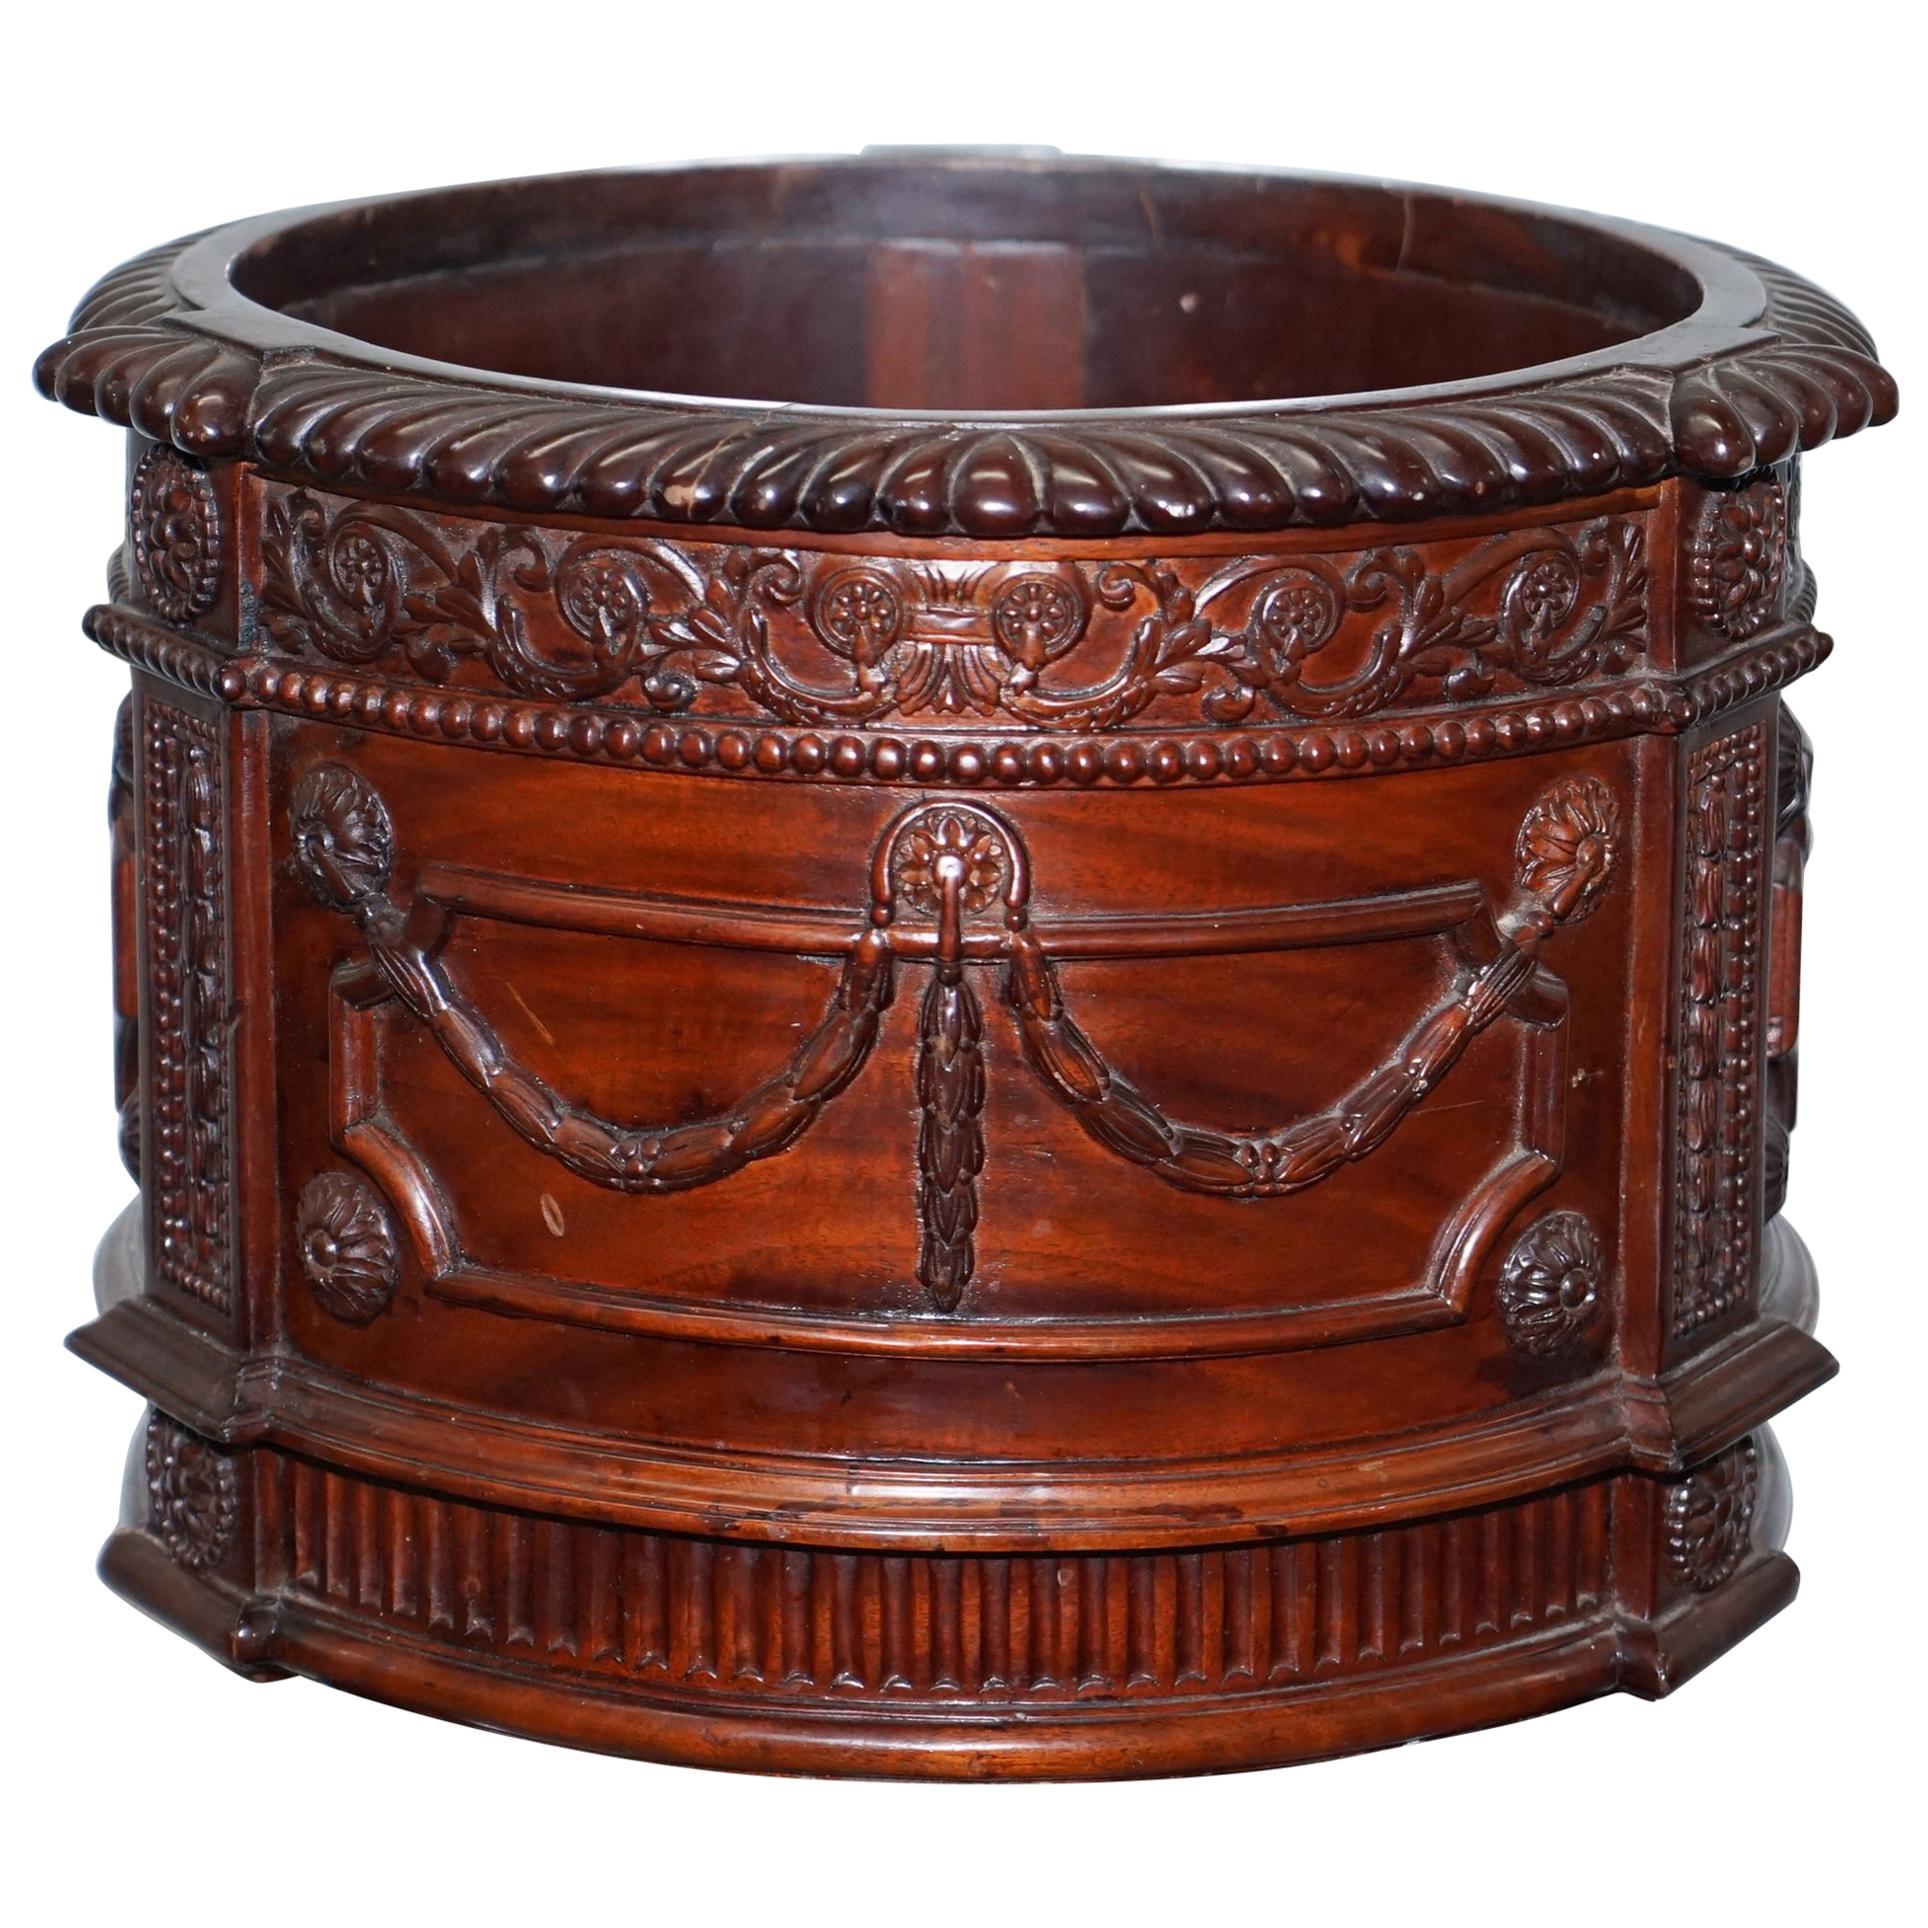 Lovely Solid Mahogany French Imperial Style Plant Pot Ornate Detailing All over